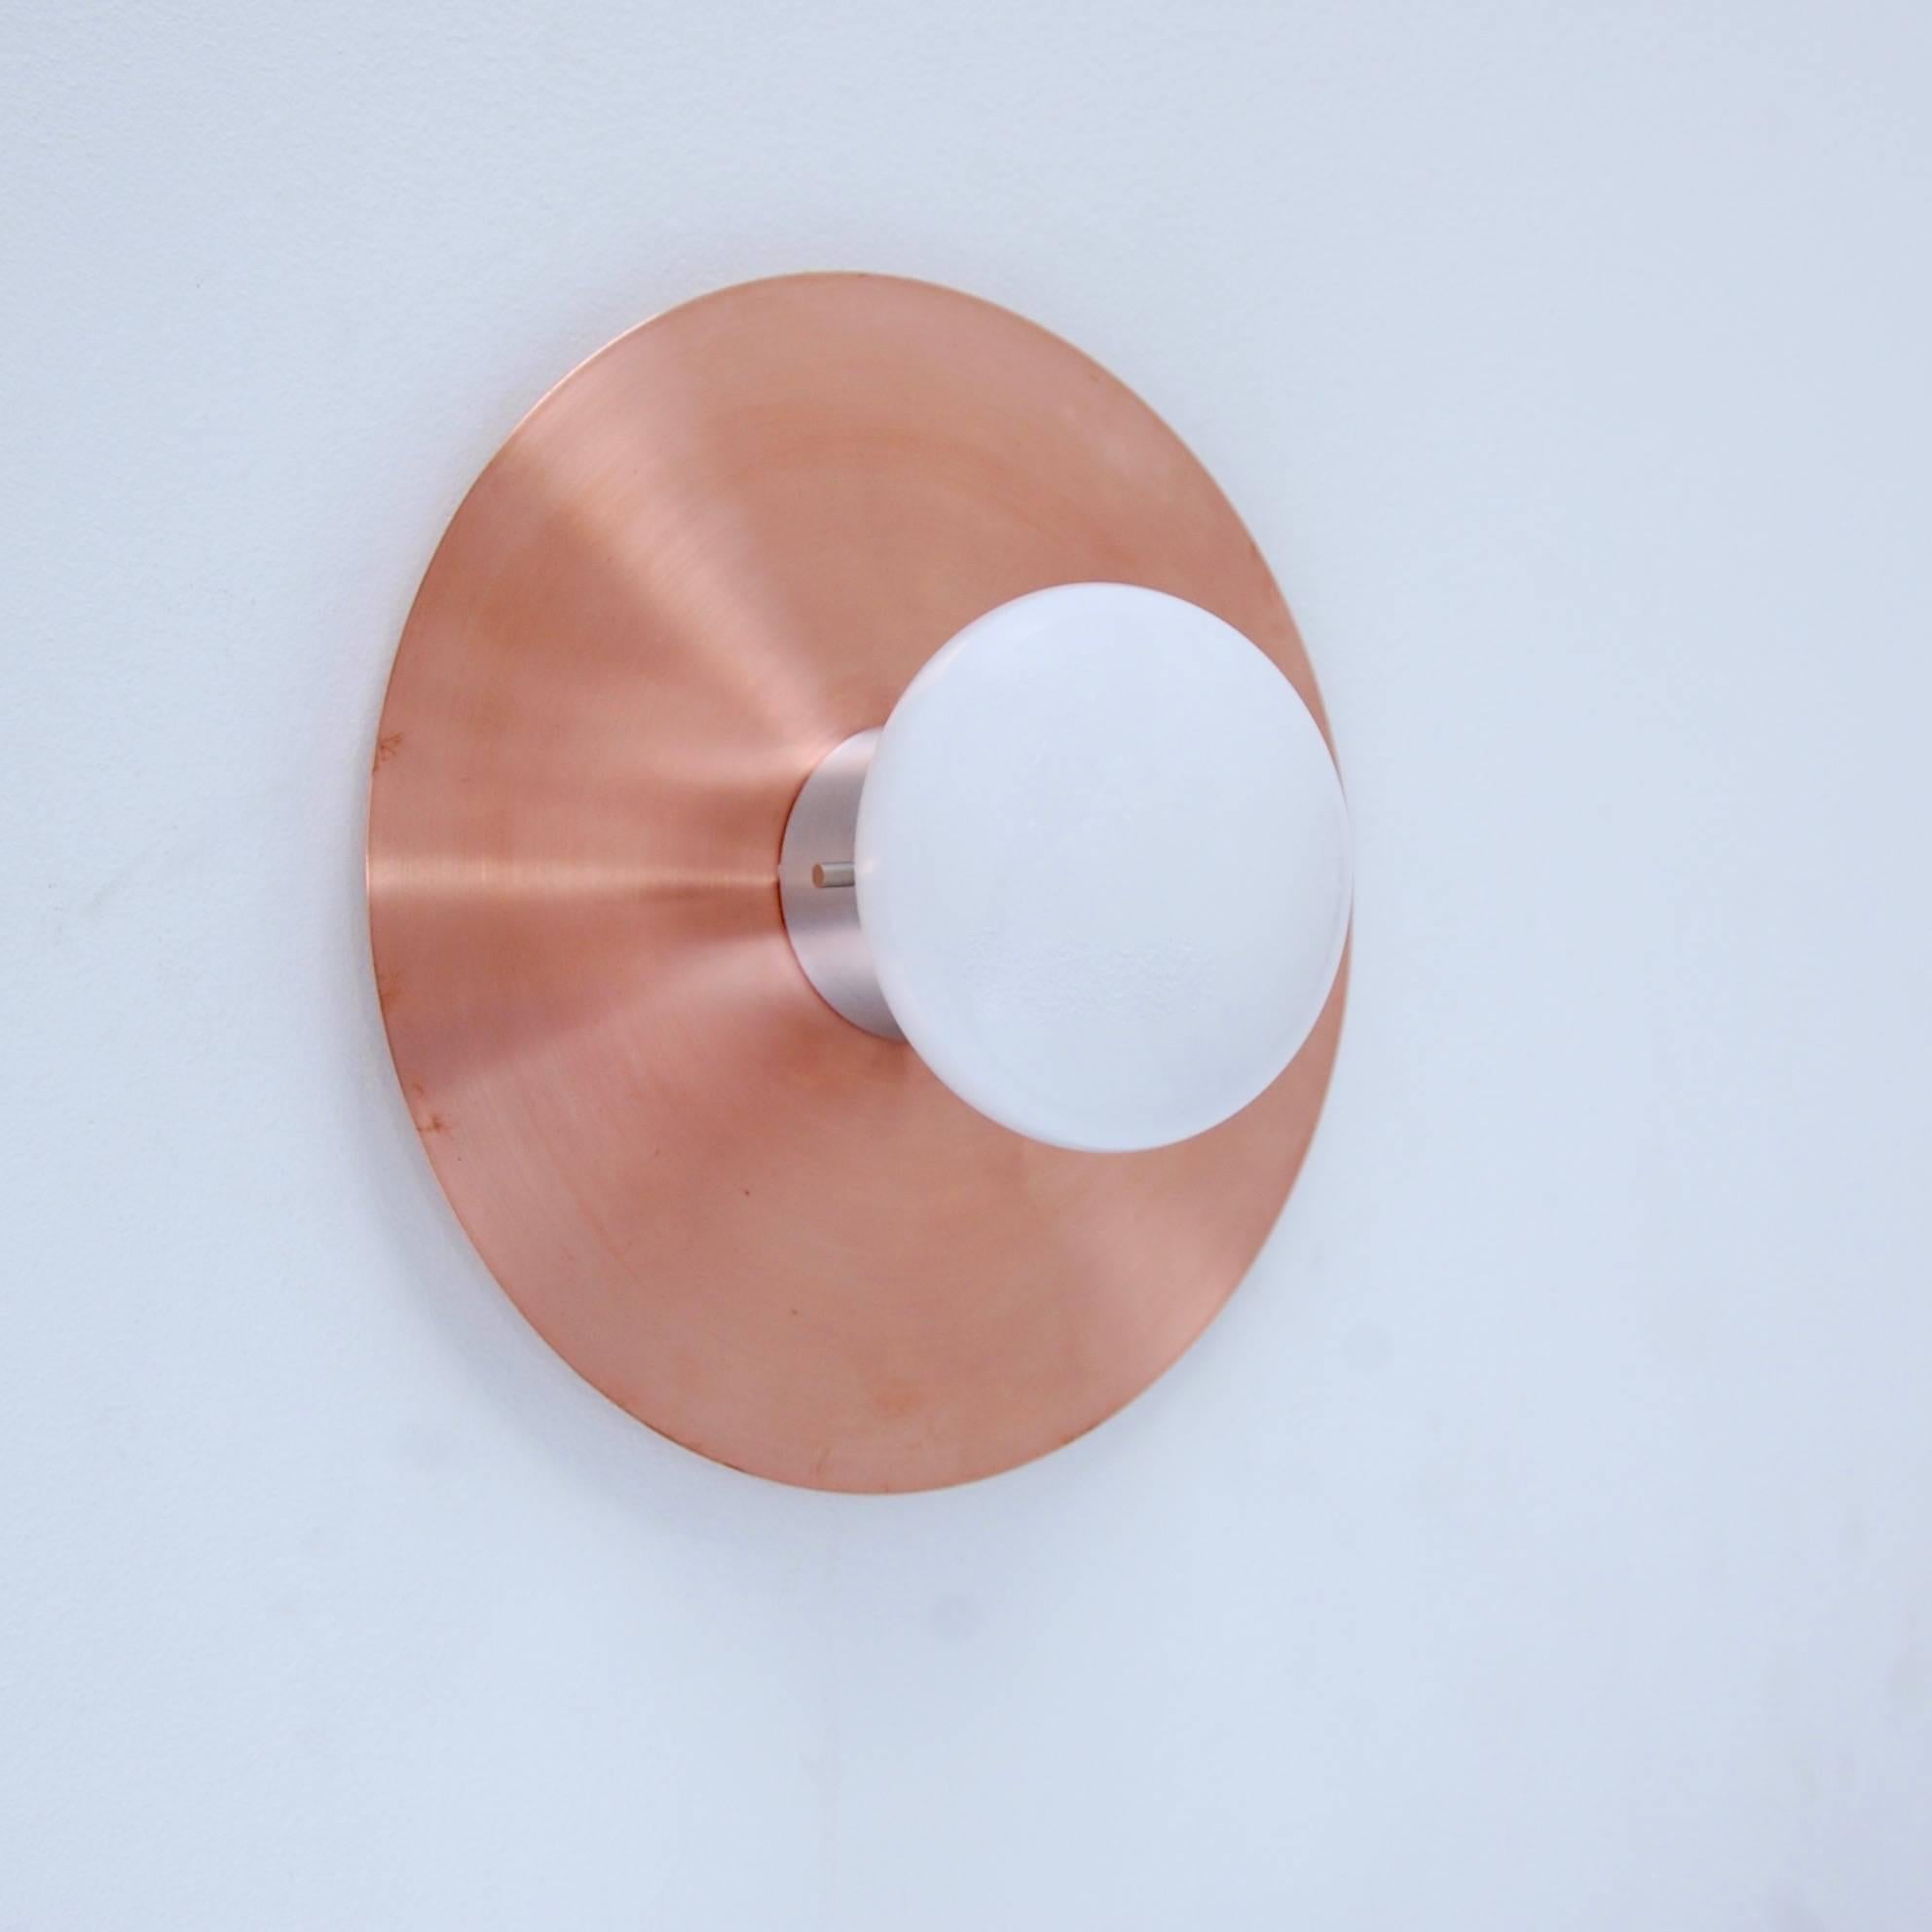 (3) 1950s Italian copper flush mount or wall fixtures in glass, copper and aluminum. Wired for the US. Can be used as ceiling mounts or wall fixtures/sconces. Single E12 candelabra based socket. 60 watts max. Priced